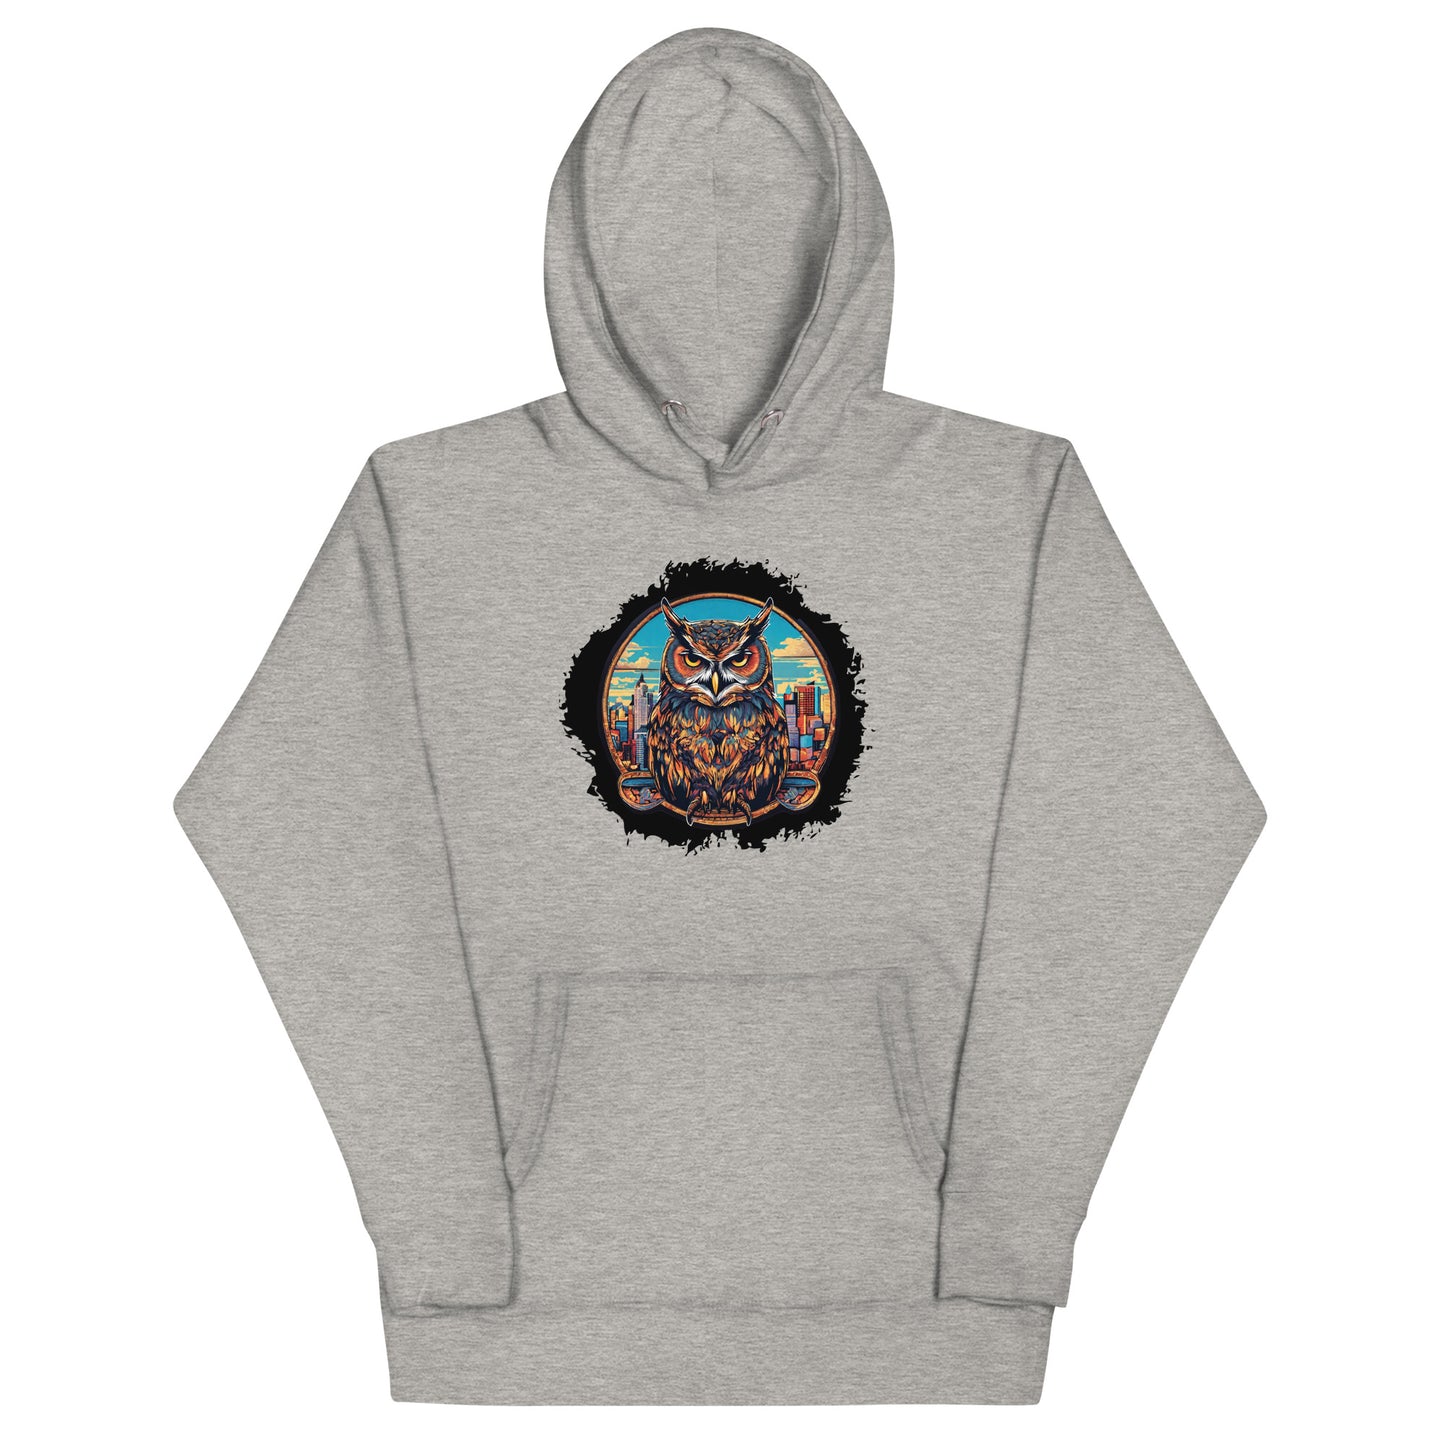 Owl in the City Emblem Hoodie Carbon Grey